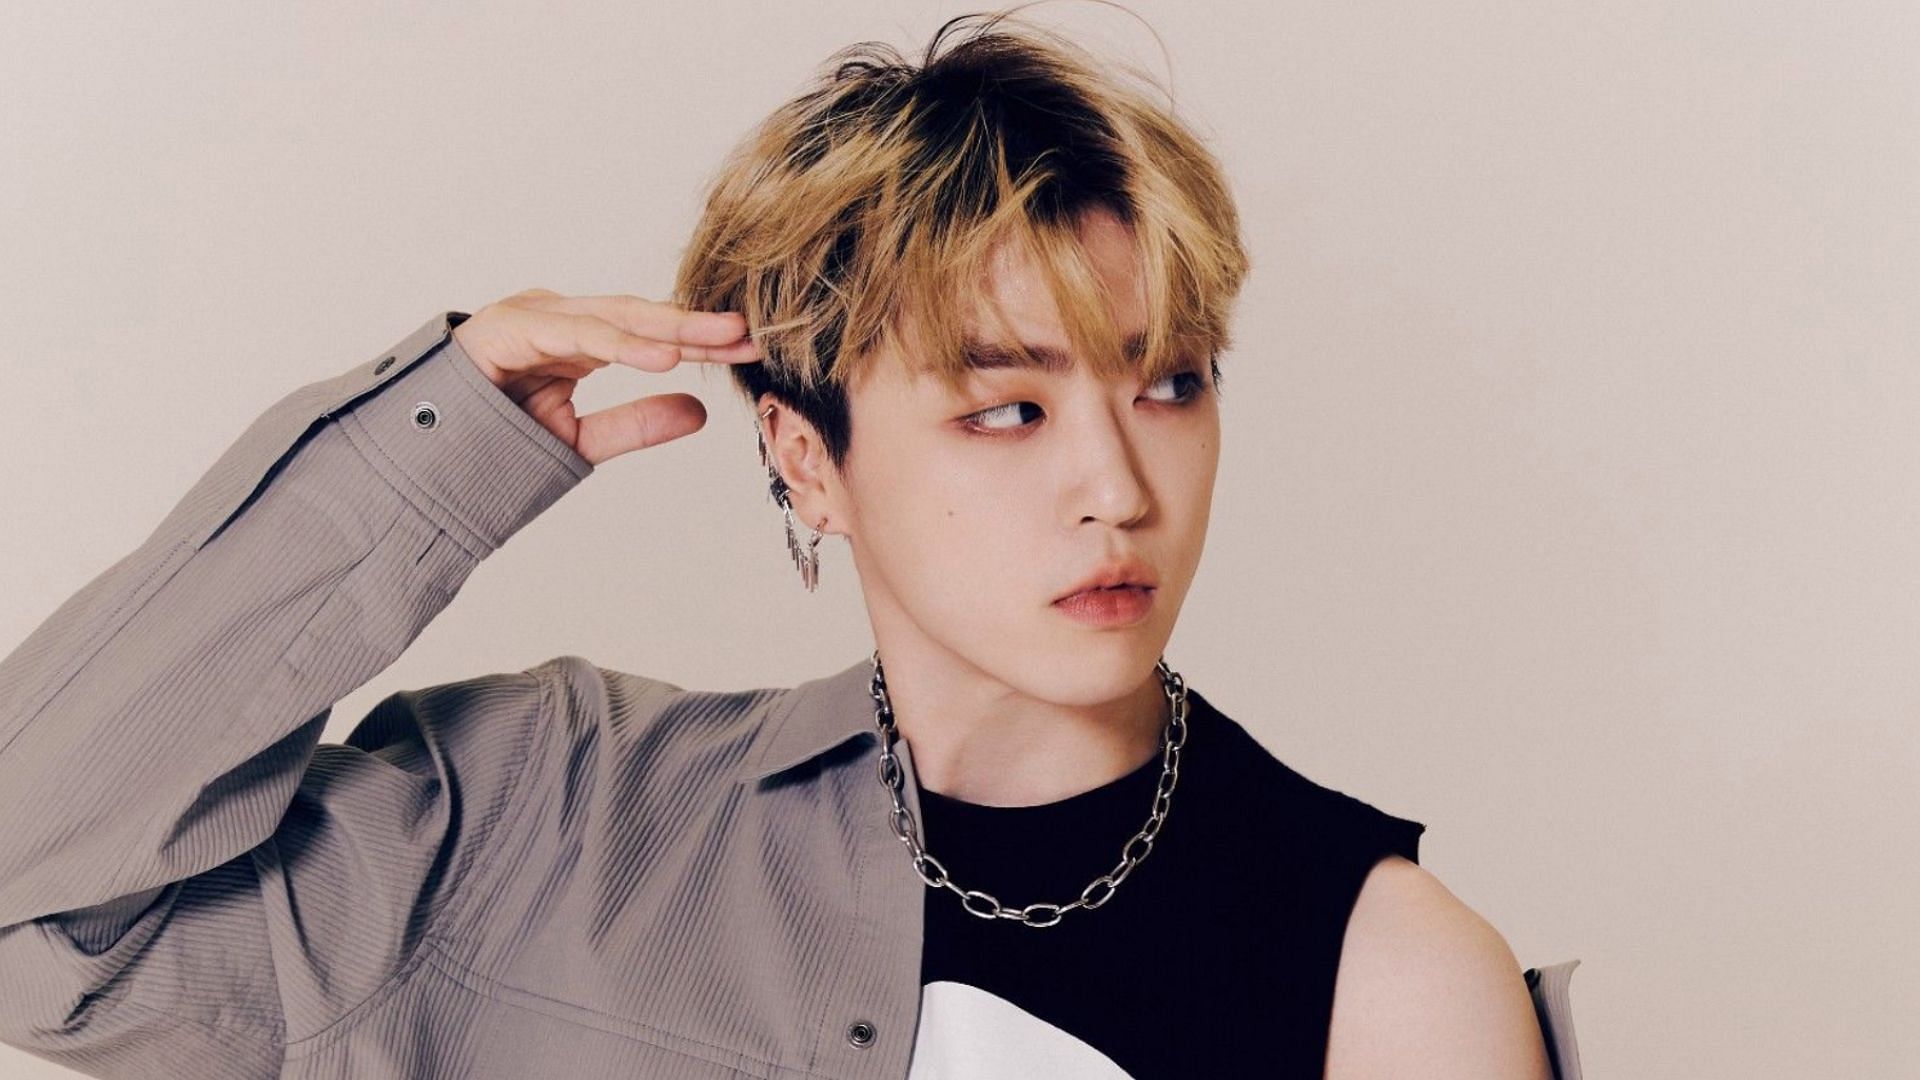 “It’s a dream come true”: JUNNY dishes on his collab song INVITATION